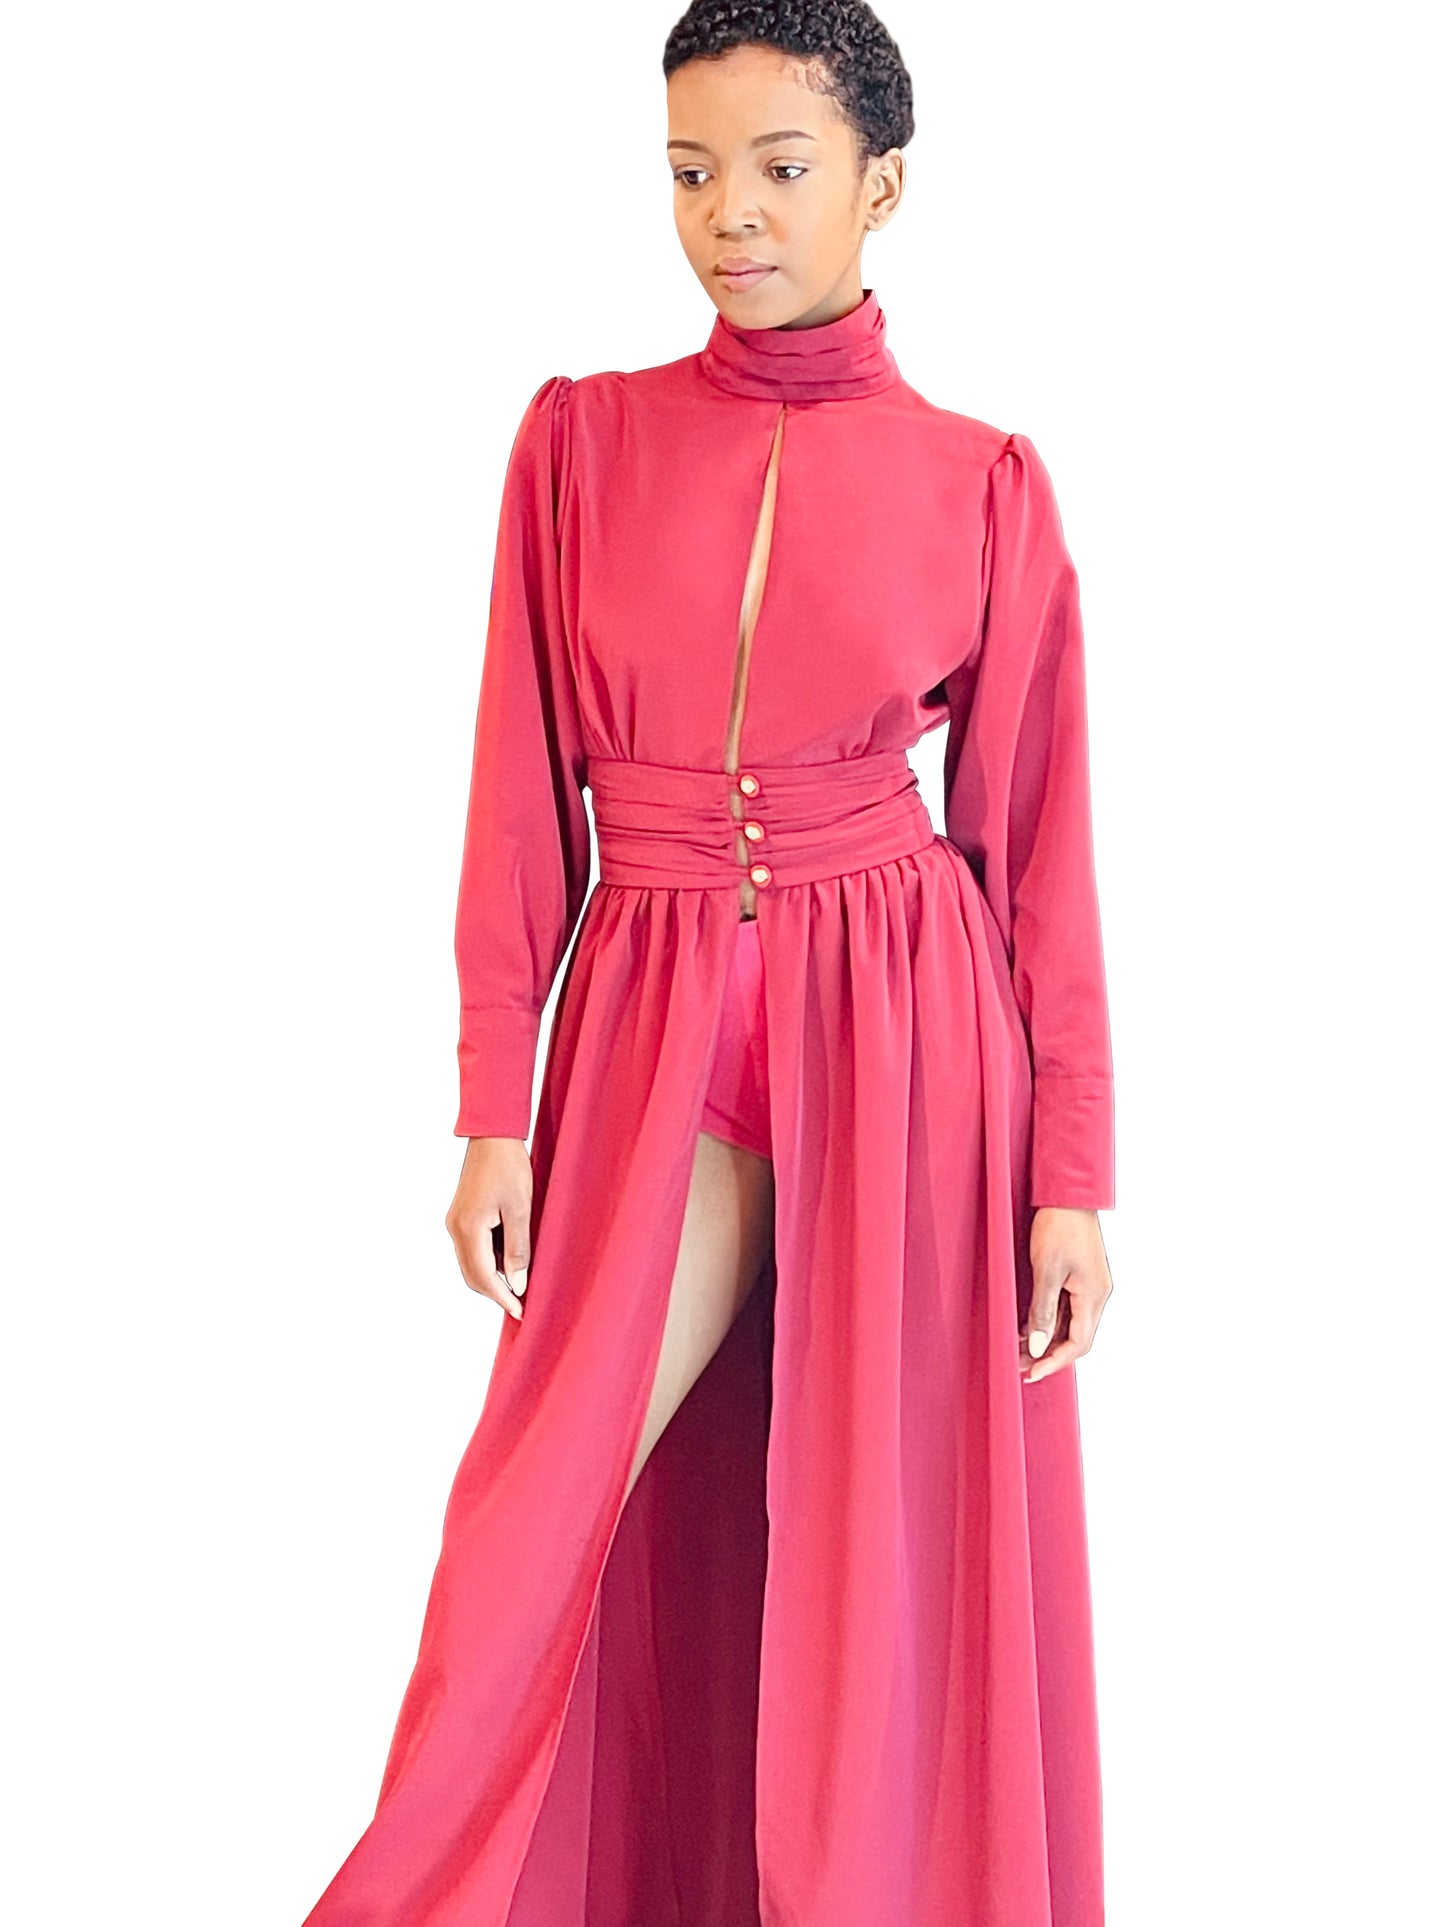 Turtleneck Hollow Out Backless Long Sleeve Pleated Dress